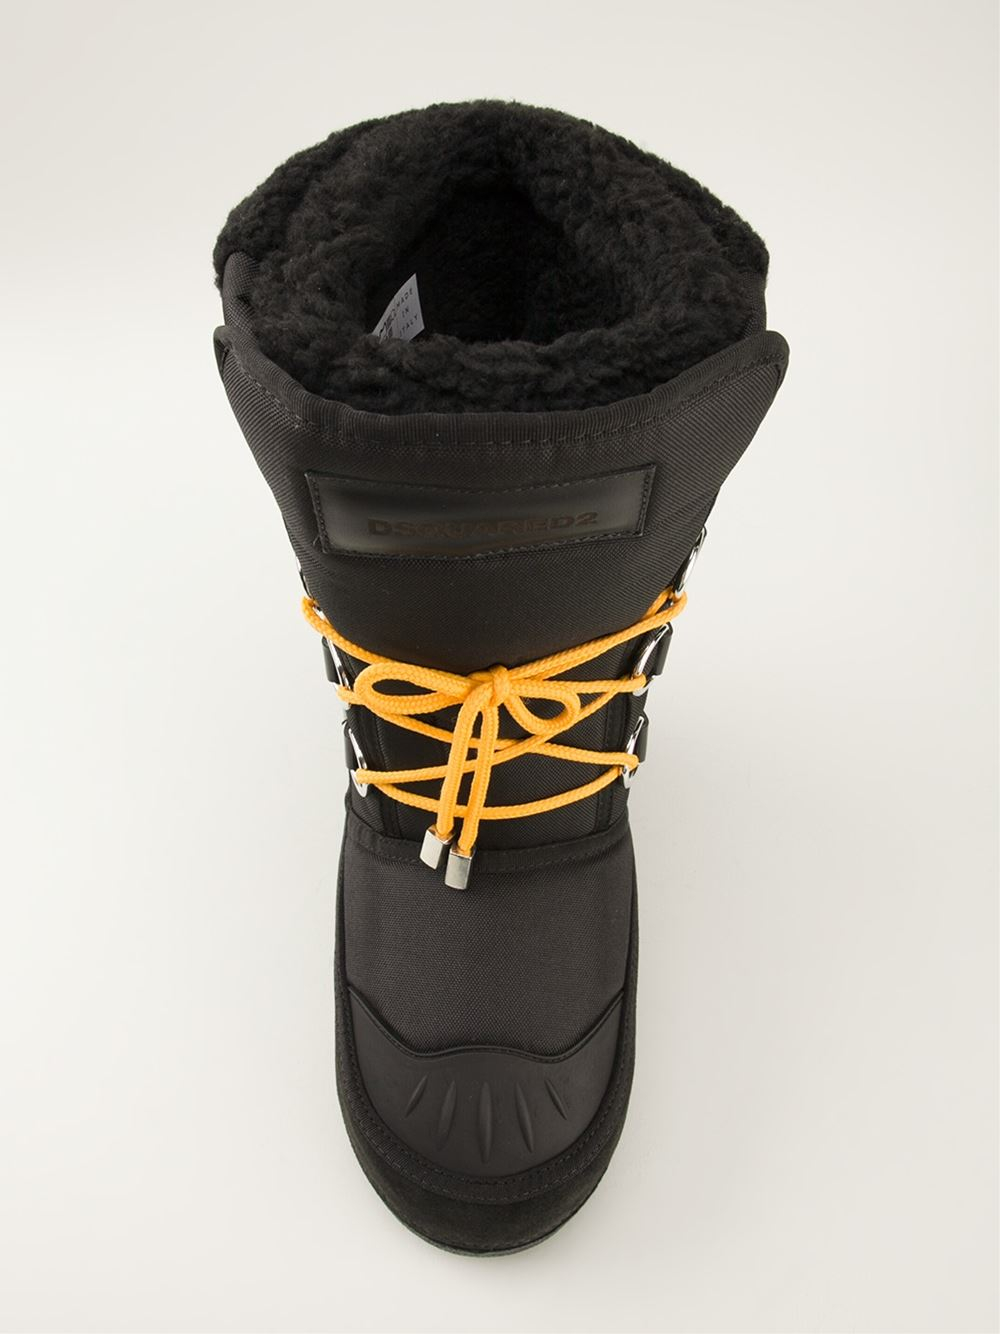 DSquared² Moon Boots in Black for Men - Lyst